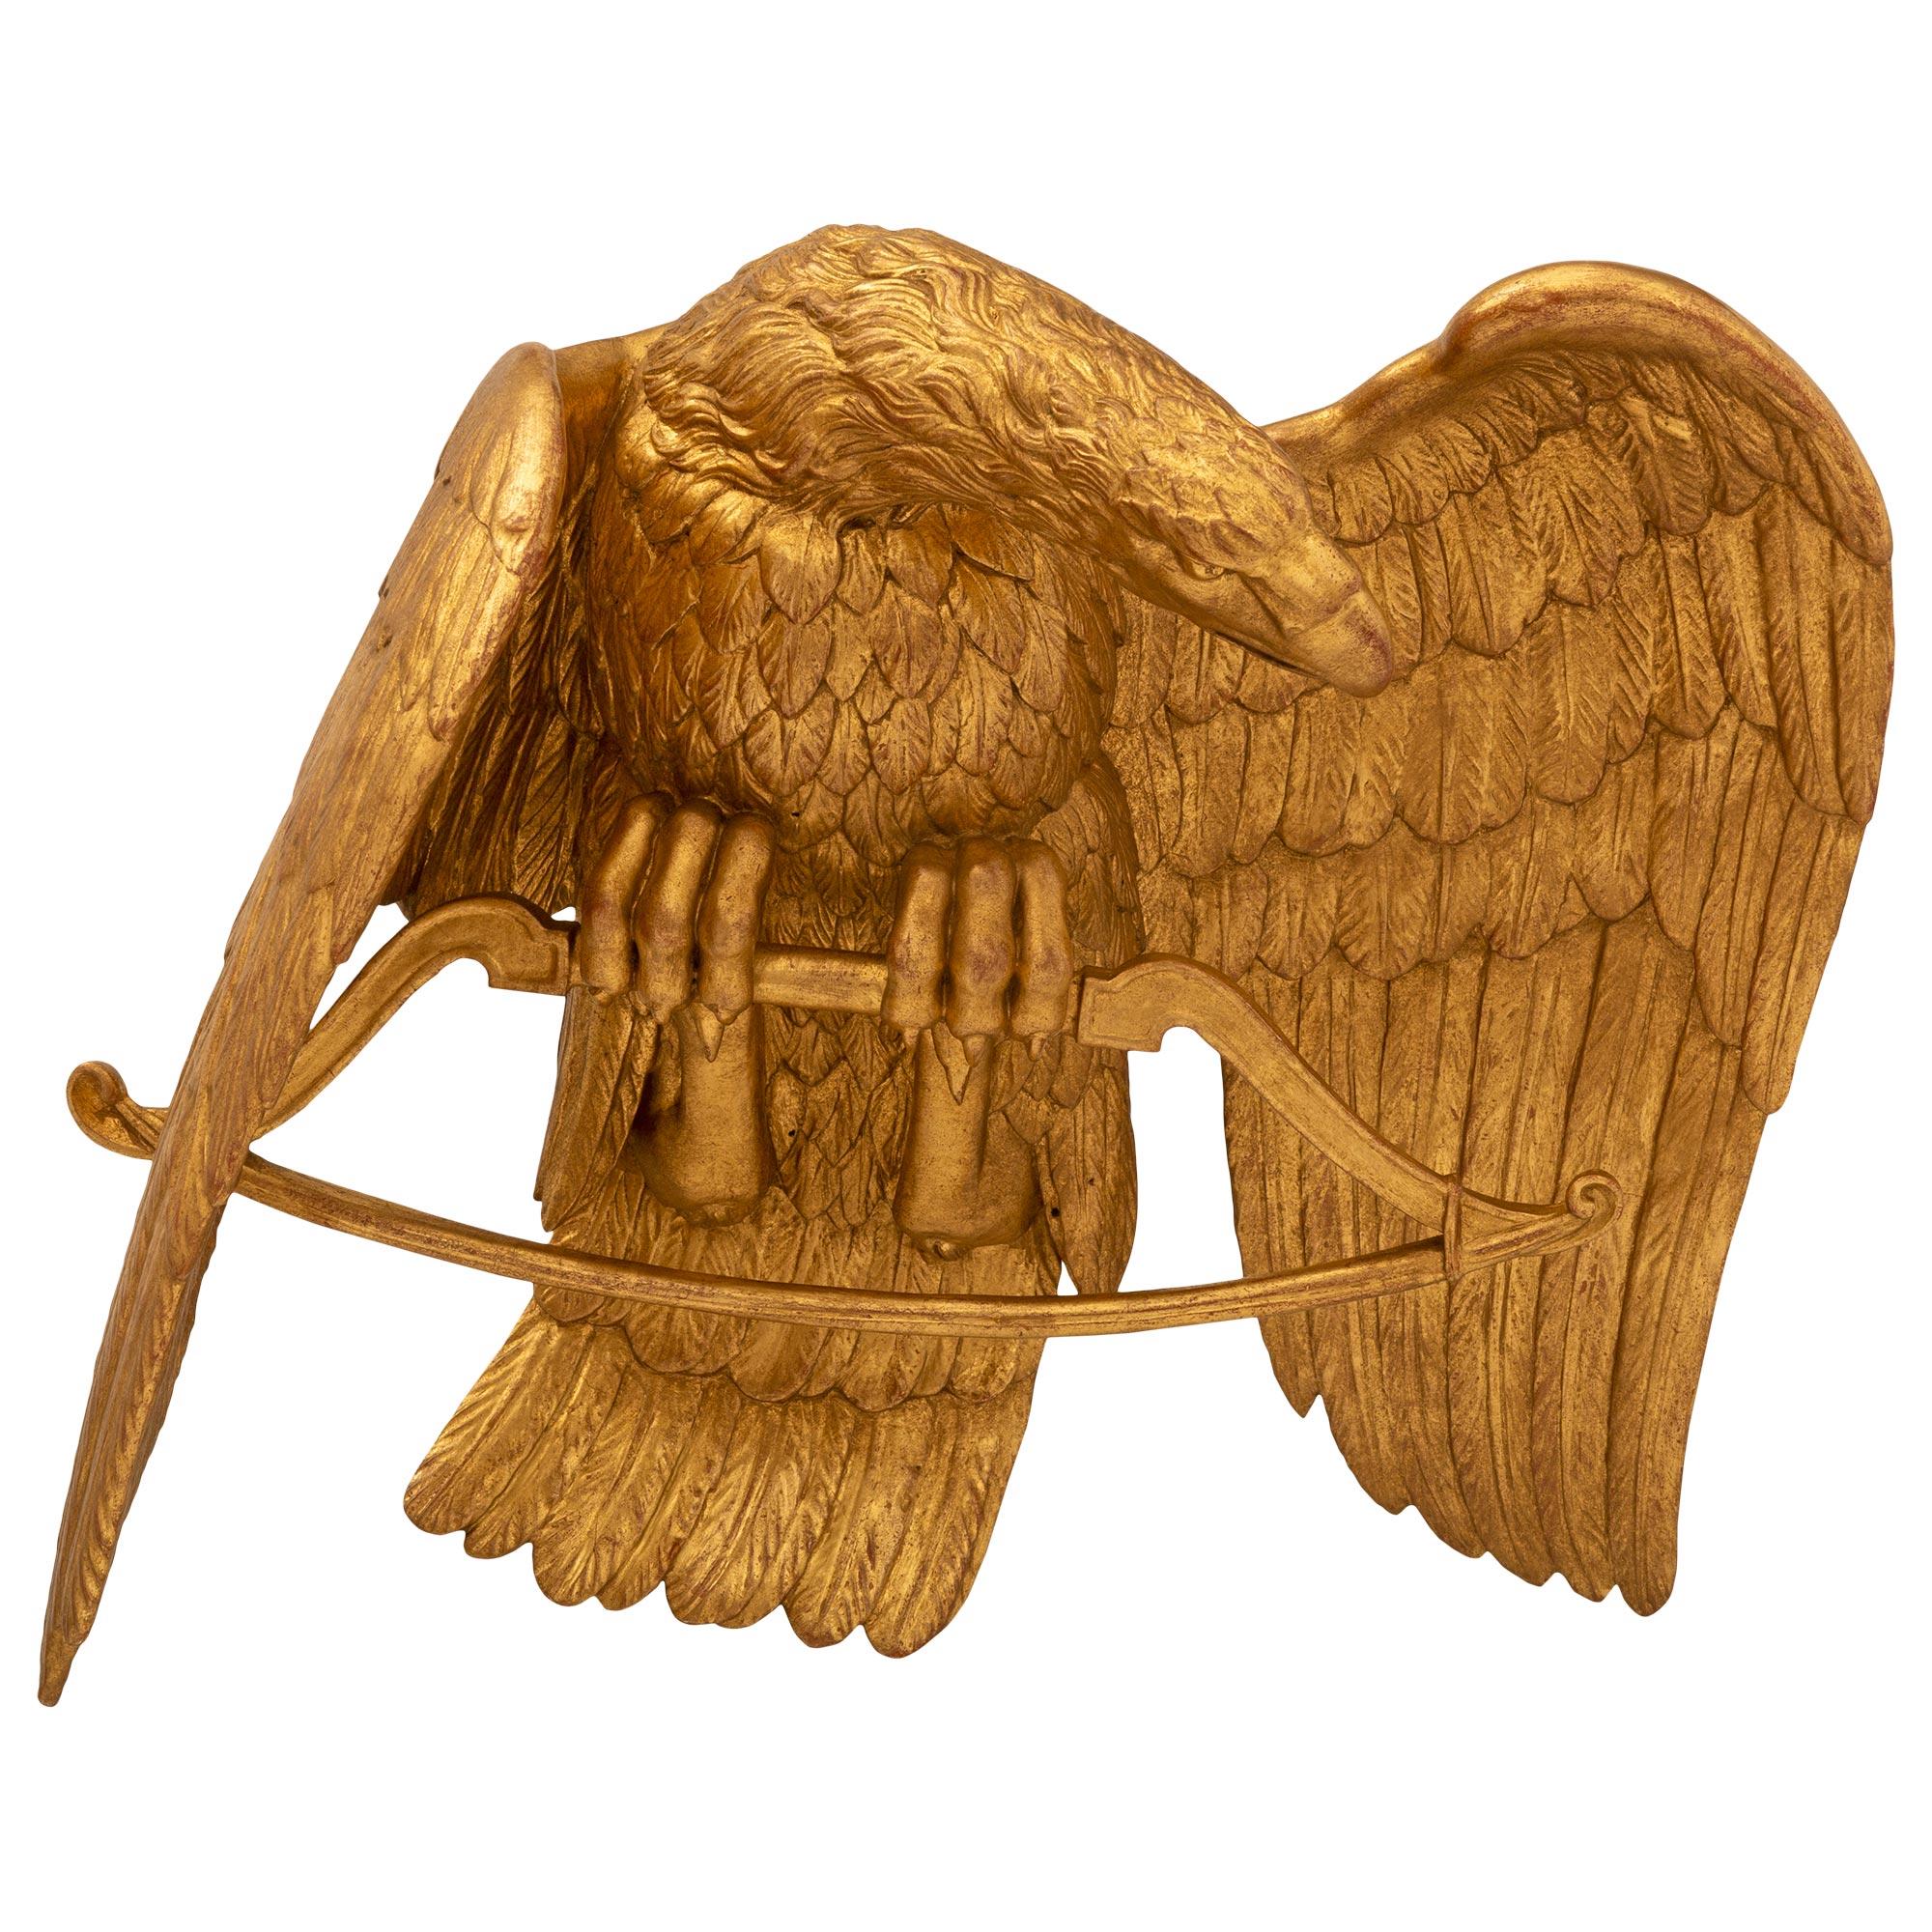 Italian Early 19th Century 1st Empire Period Giltwood Eagle Wall Decor For Sale 6